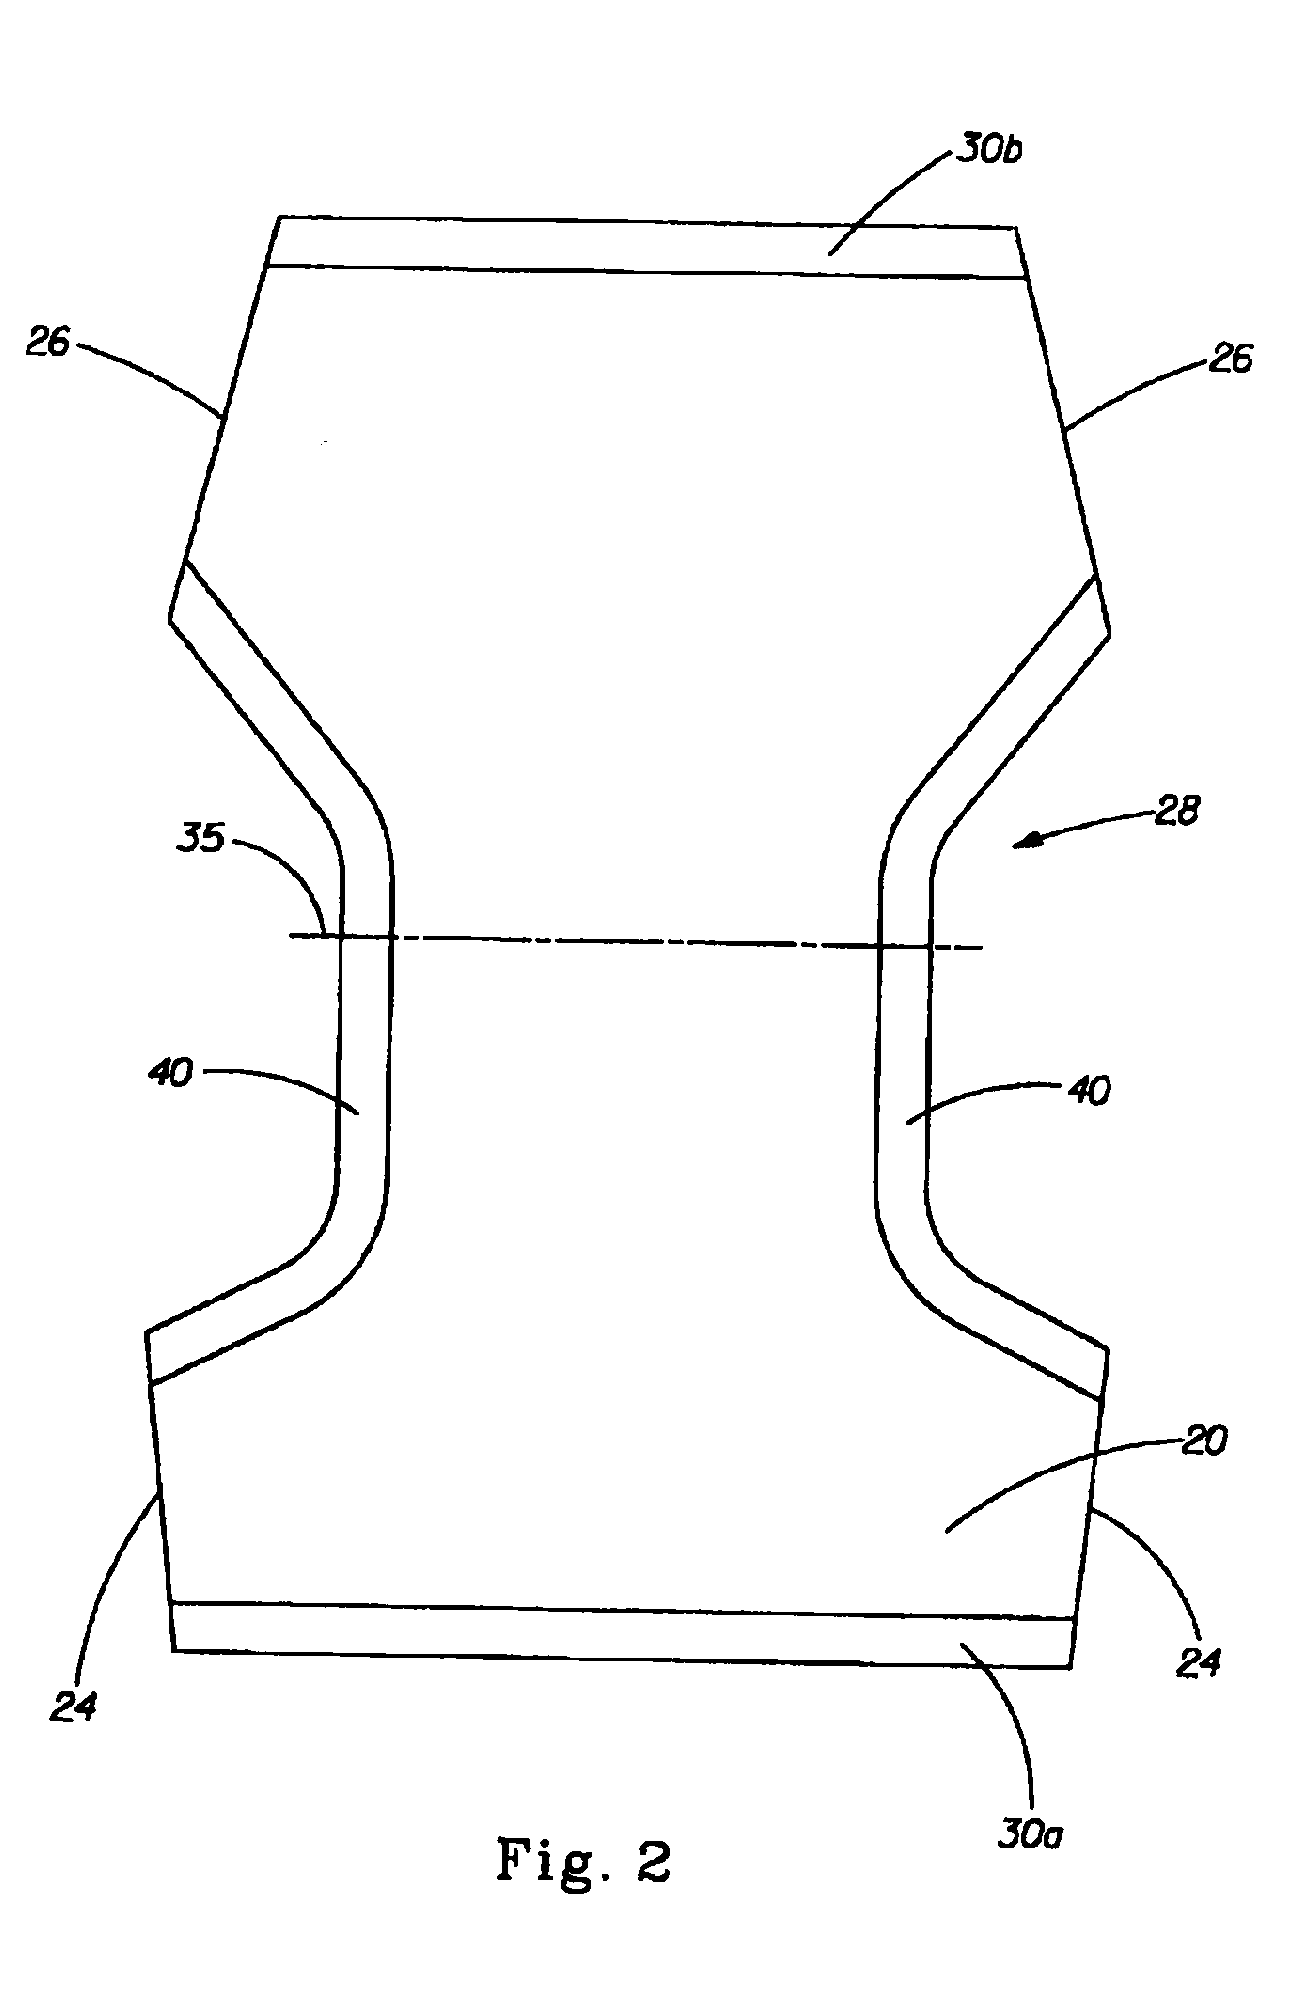 System for High-Speed Continuous Application of a Strip Material to a Moving Sheet-Like Substrate Material at Laterally Shifting Locations